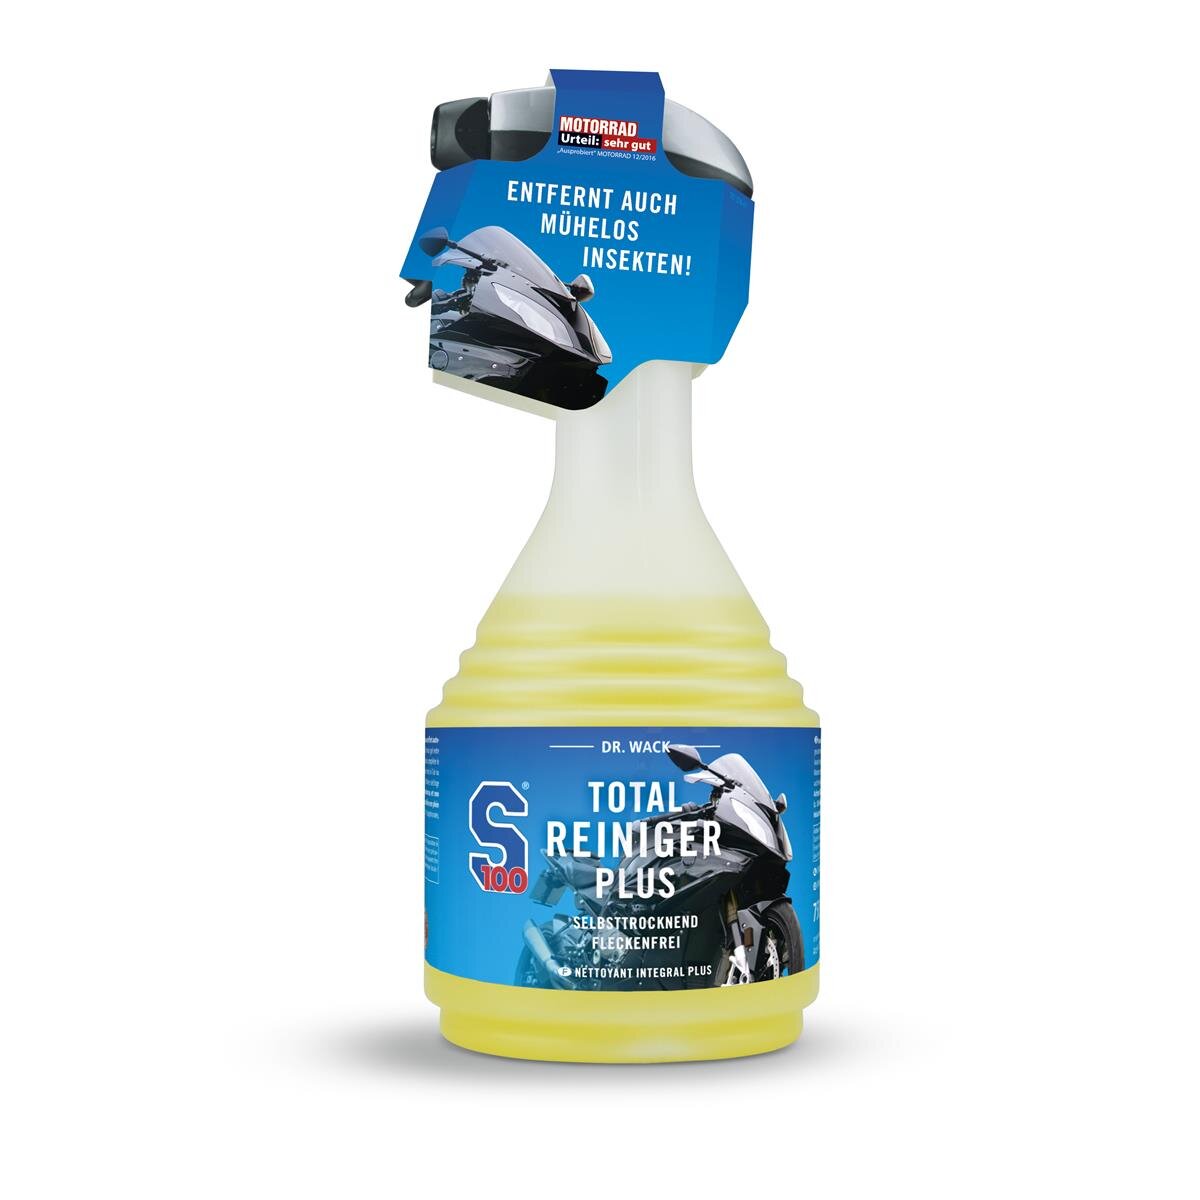 S100 TOTAL CYCLE CLEANER